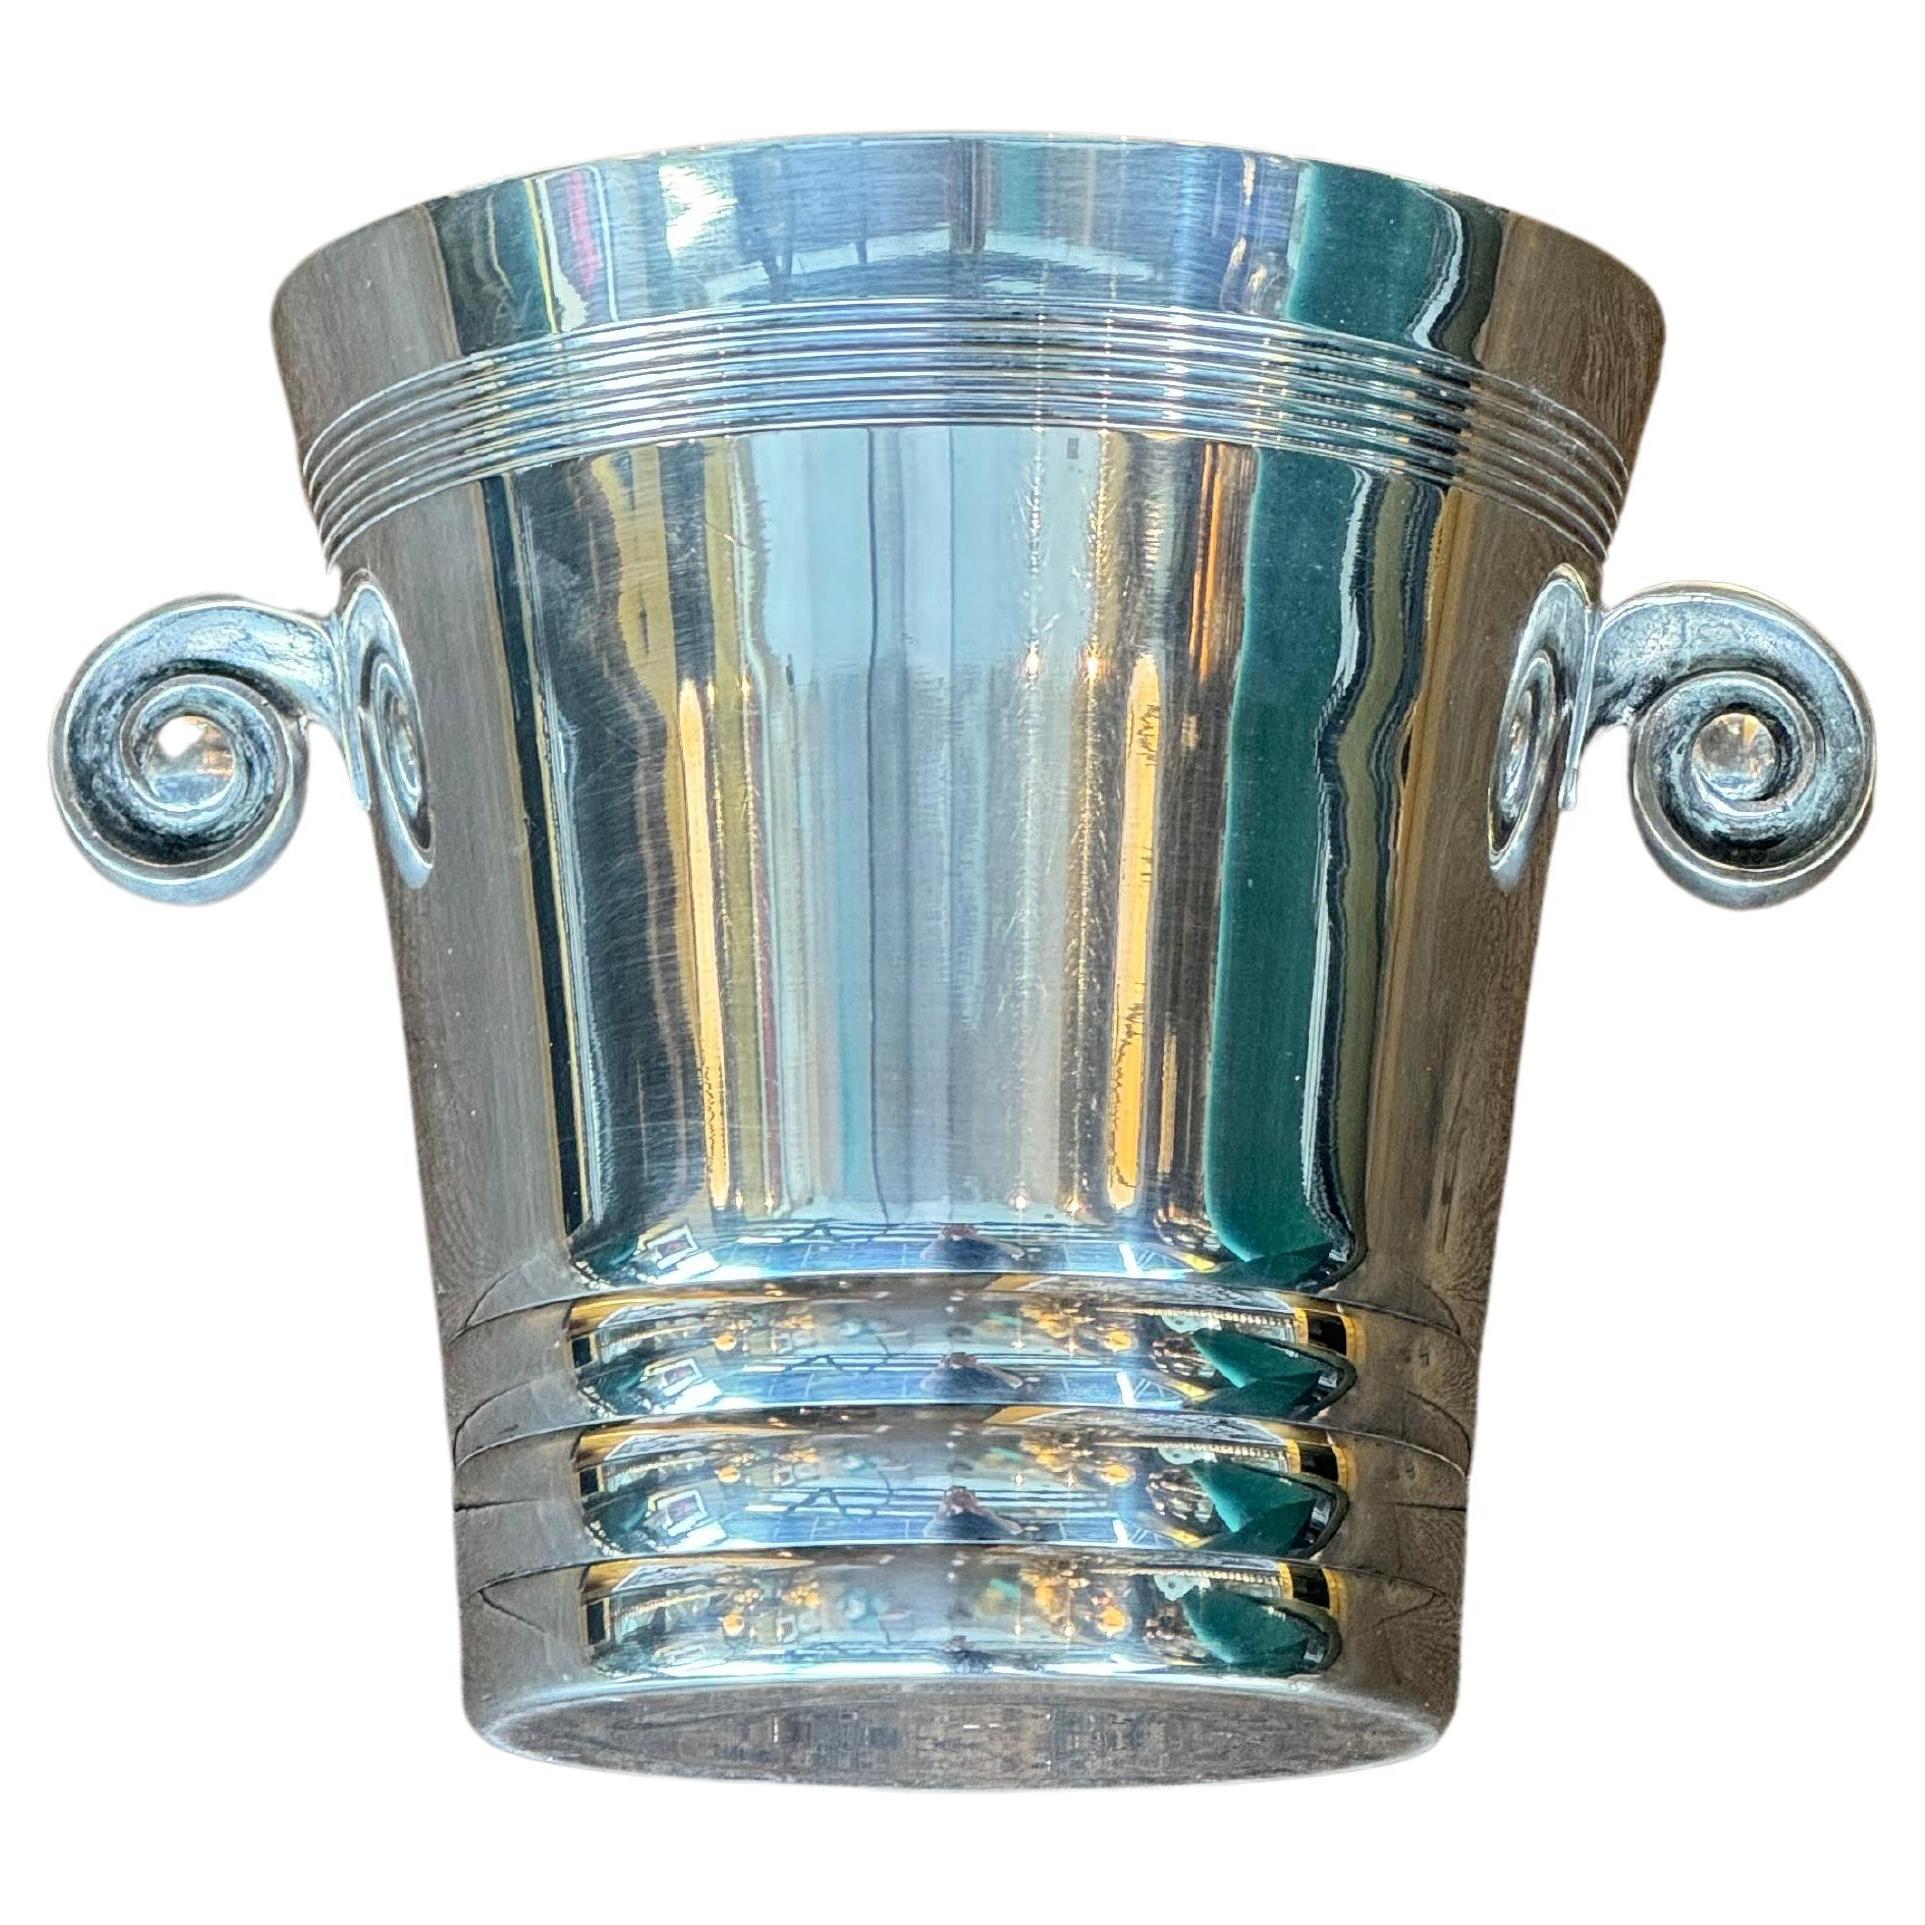 Sheffield Sterling Silver-Plated English Ice Bucket
Sourced by Martyn Lawrence Bullard from London, England
